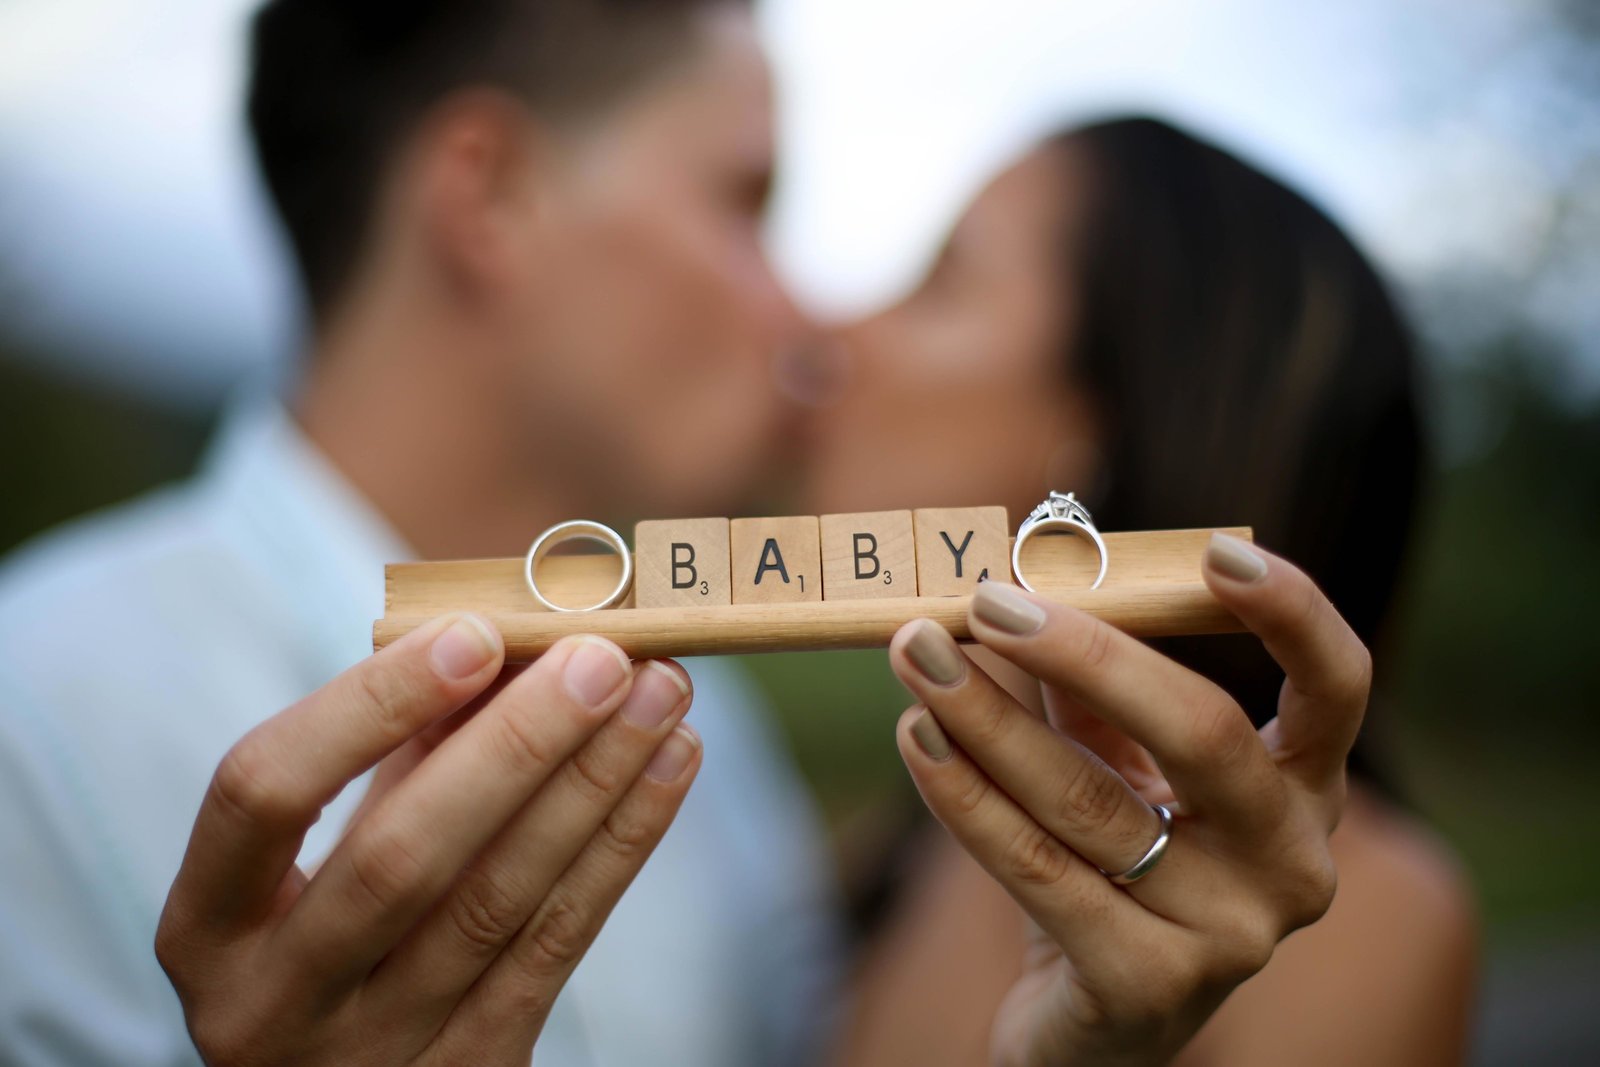 Couple holding scrabble tiles spelling "baby". Photo by Ross Photography, Trinidad, W.I..